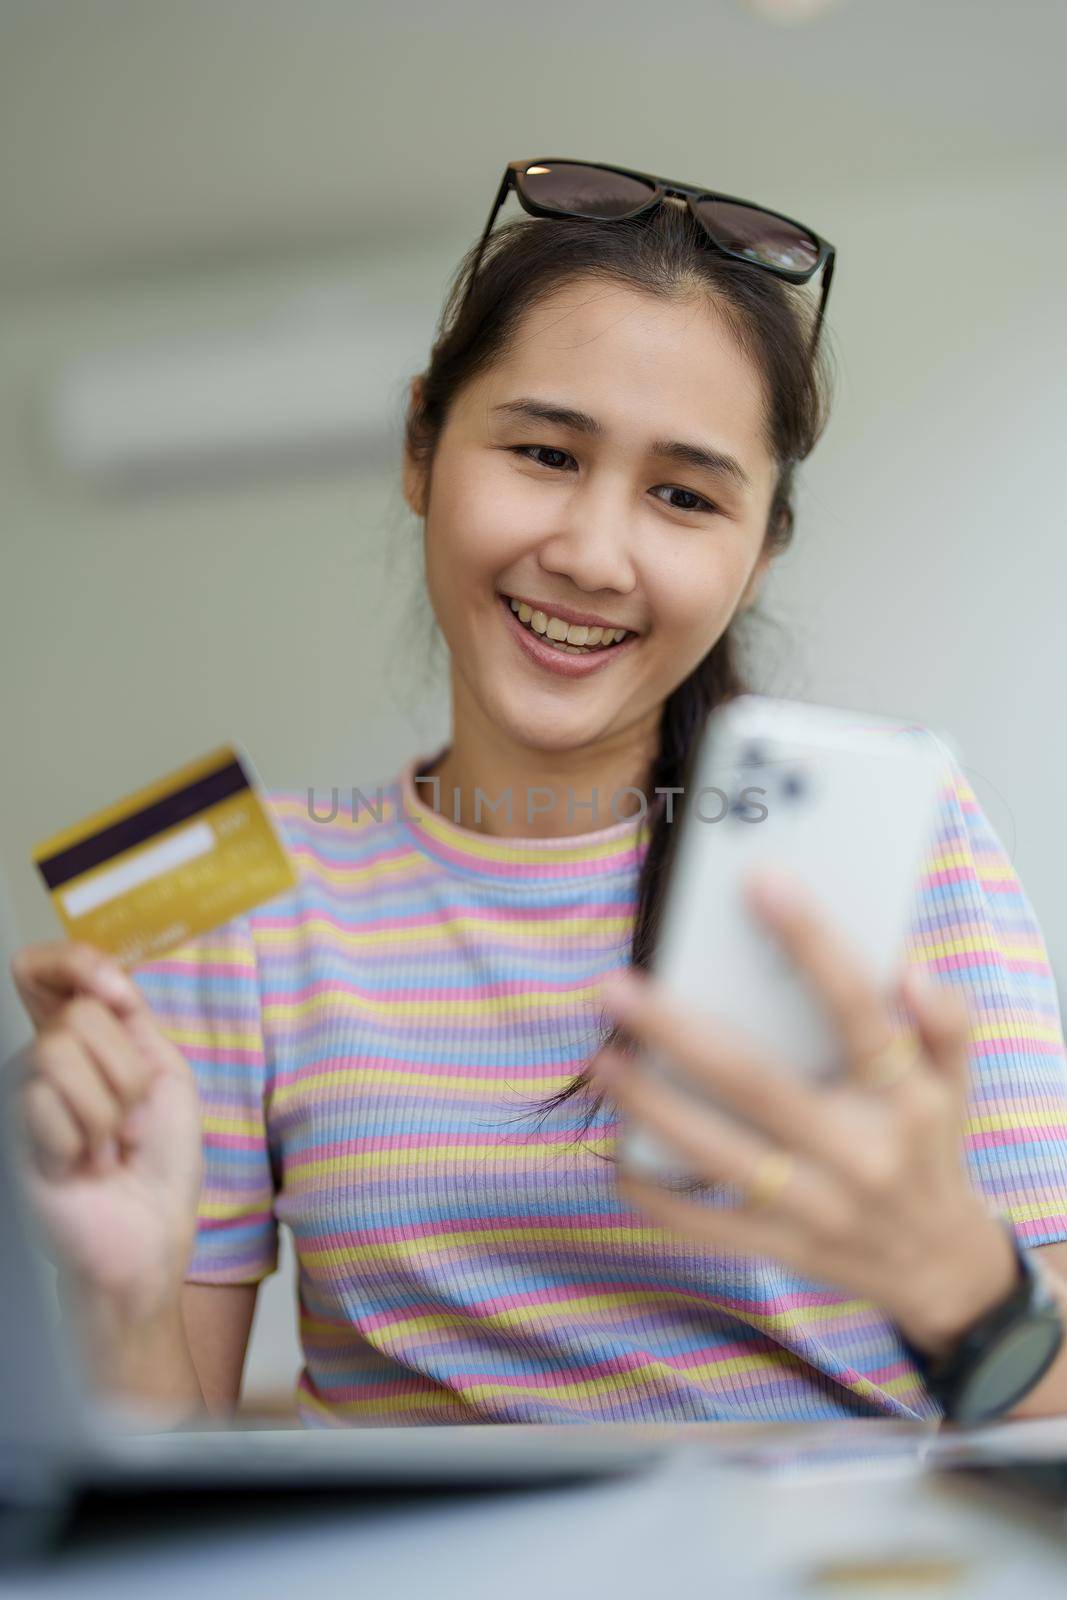 Online Shopping and Internet Payments, Portrait of Beautiful Asian women are using their credit cards and mobile phones to shop online or conduct errands in the digital world by Manastrong